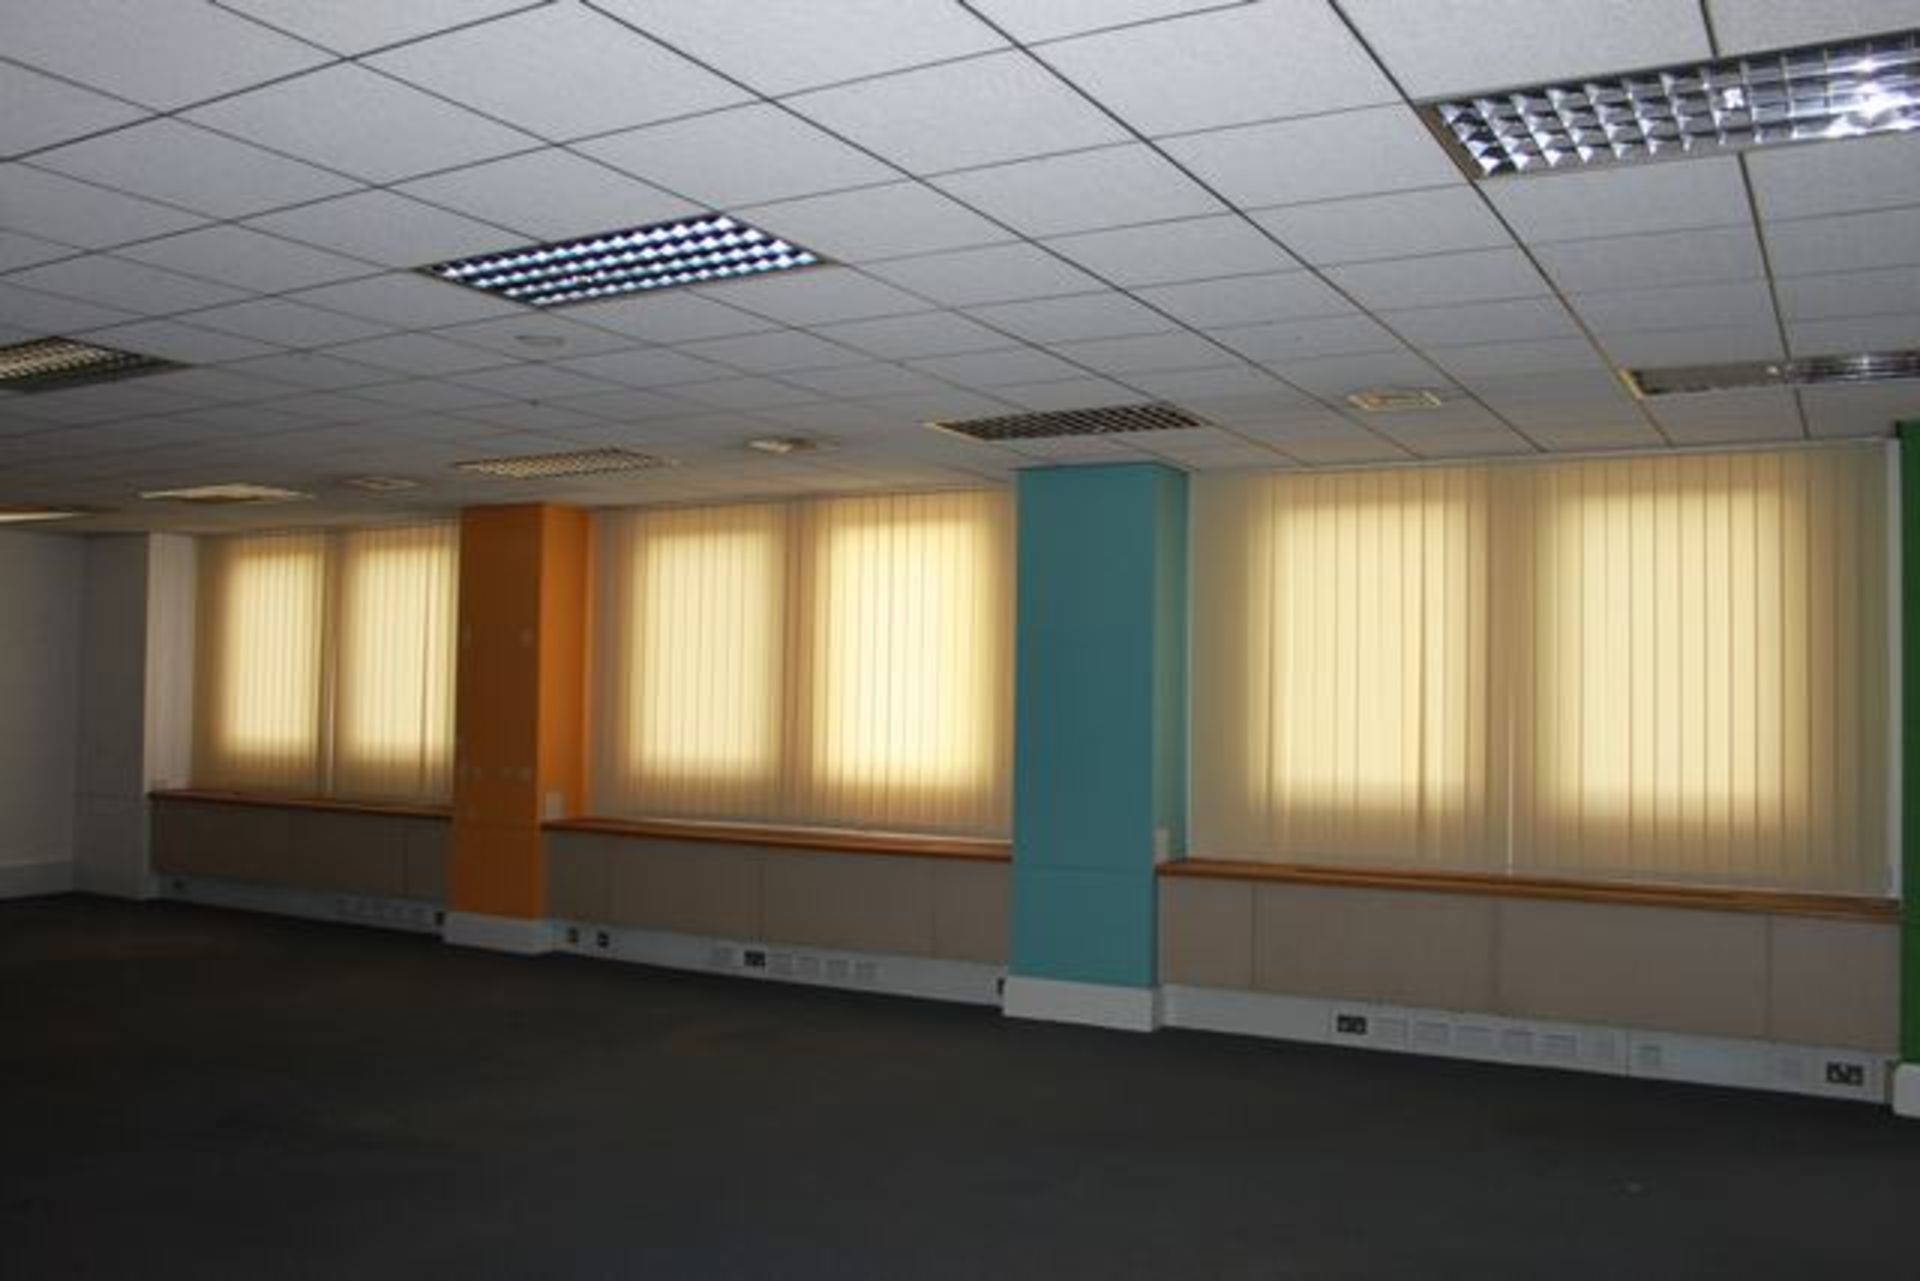 4 x sets vertical blind cream 1300mm x 1800mm complete with robust aluminium head rail with beaded